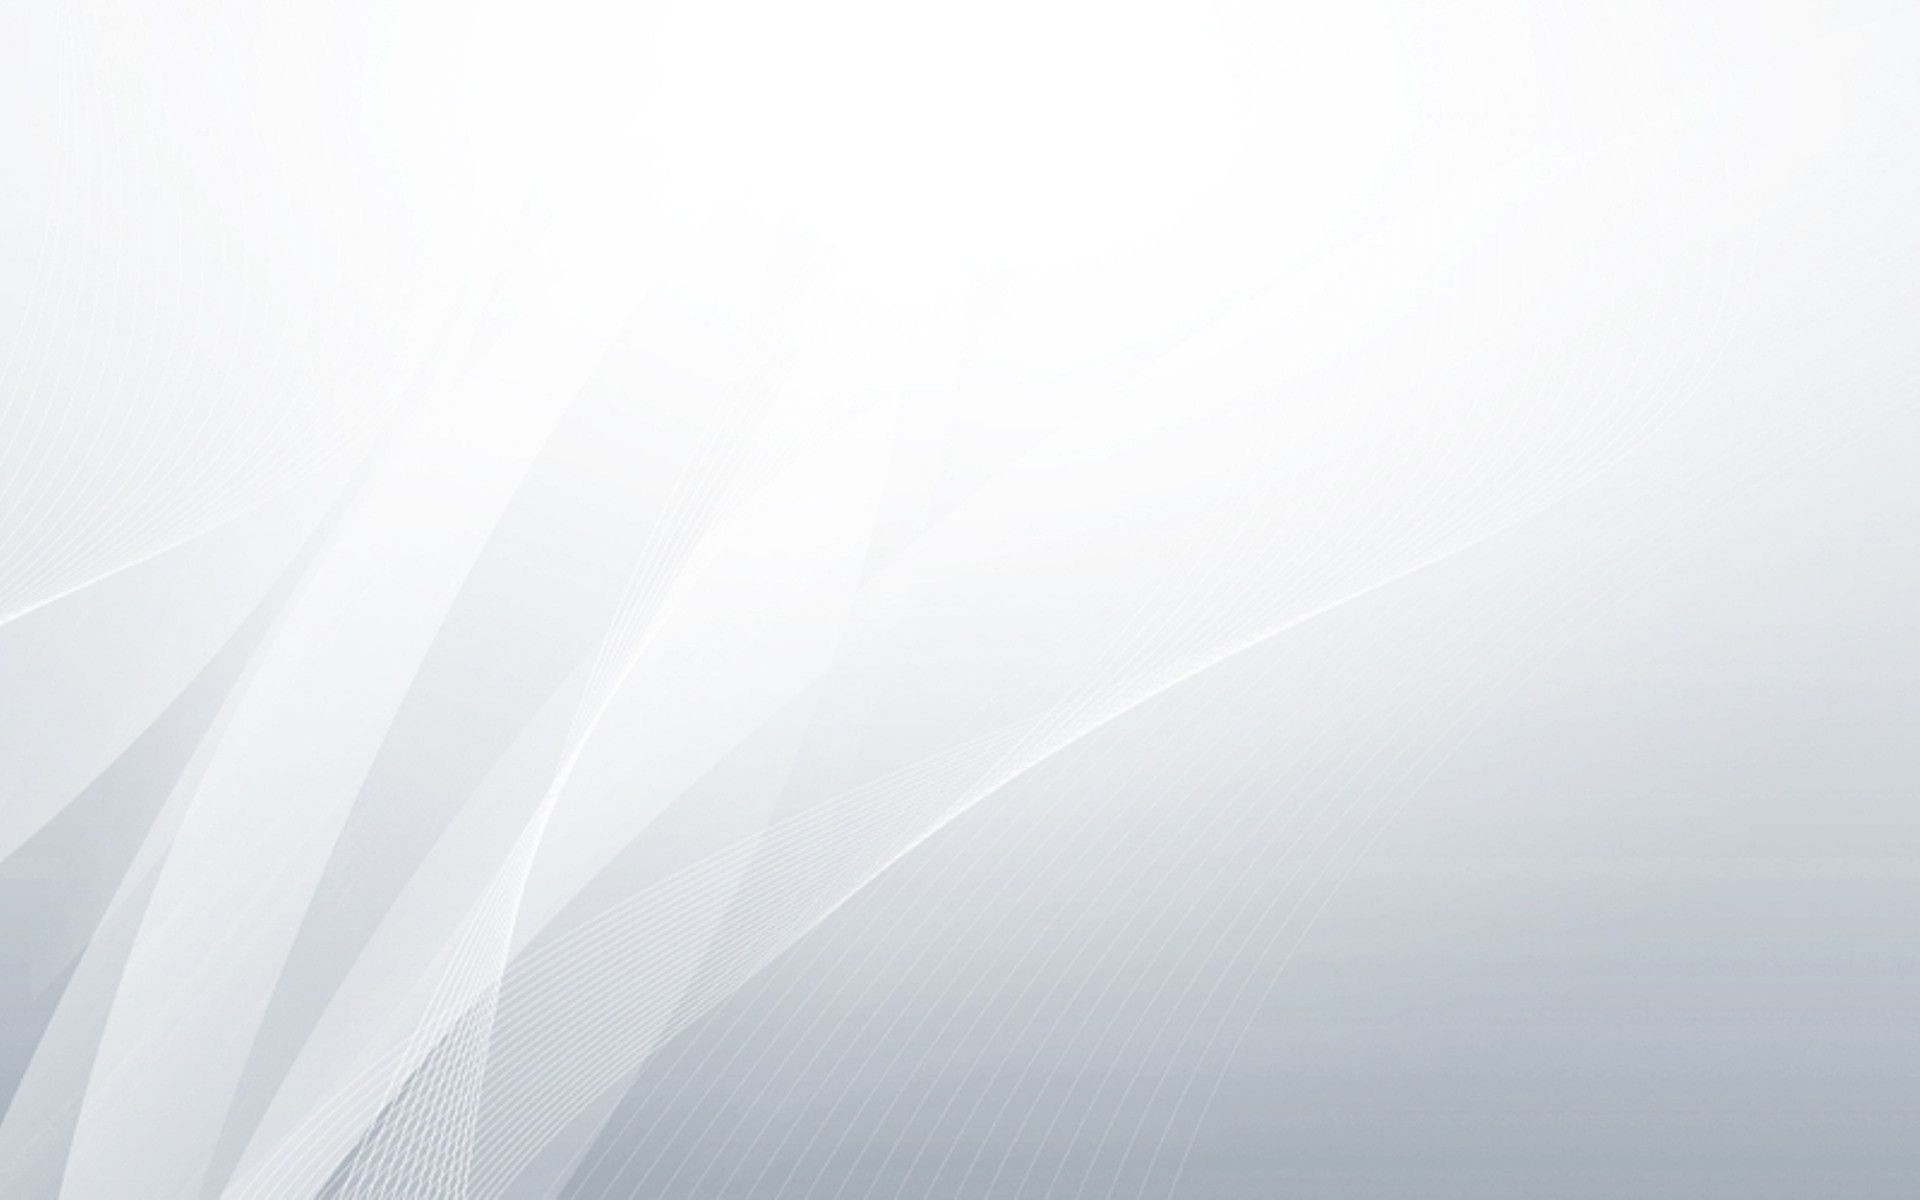  White  Abstract background    Download free stunning 